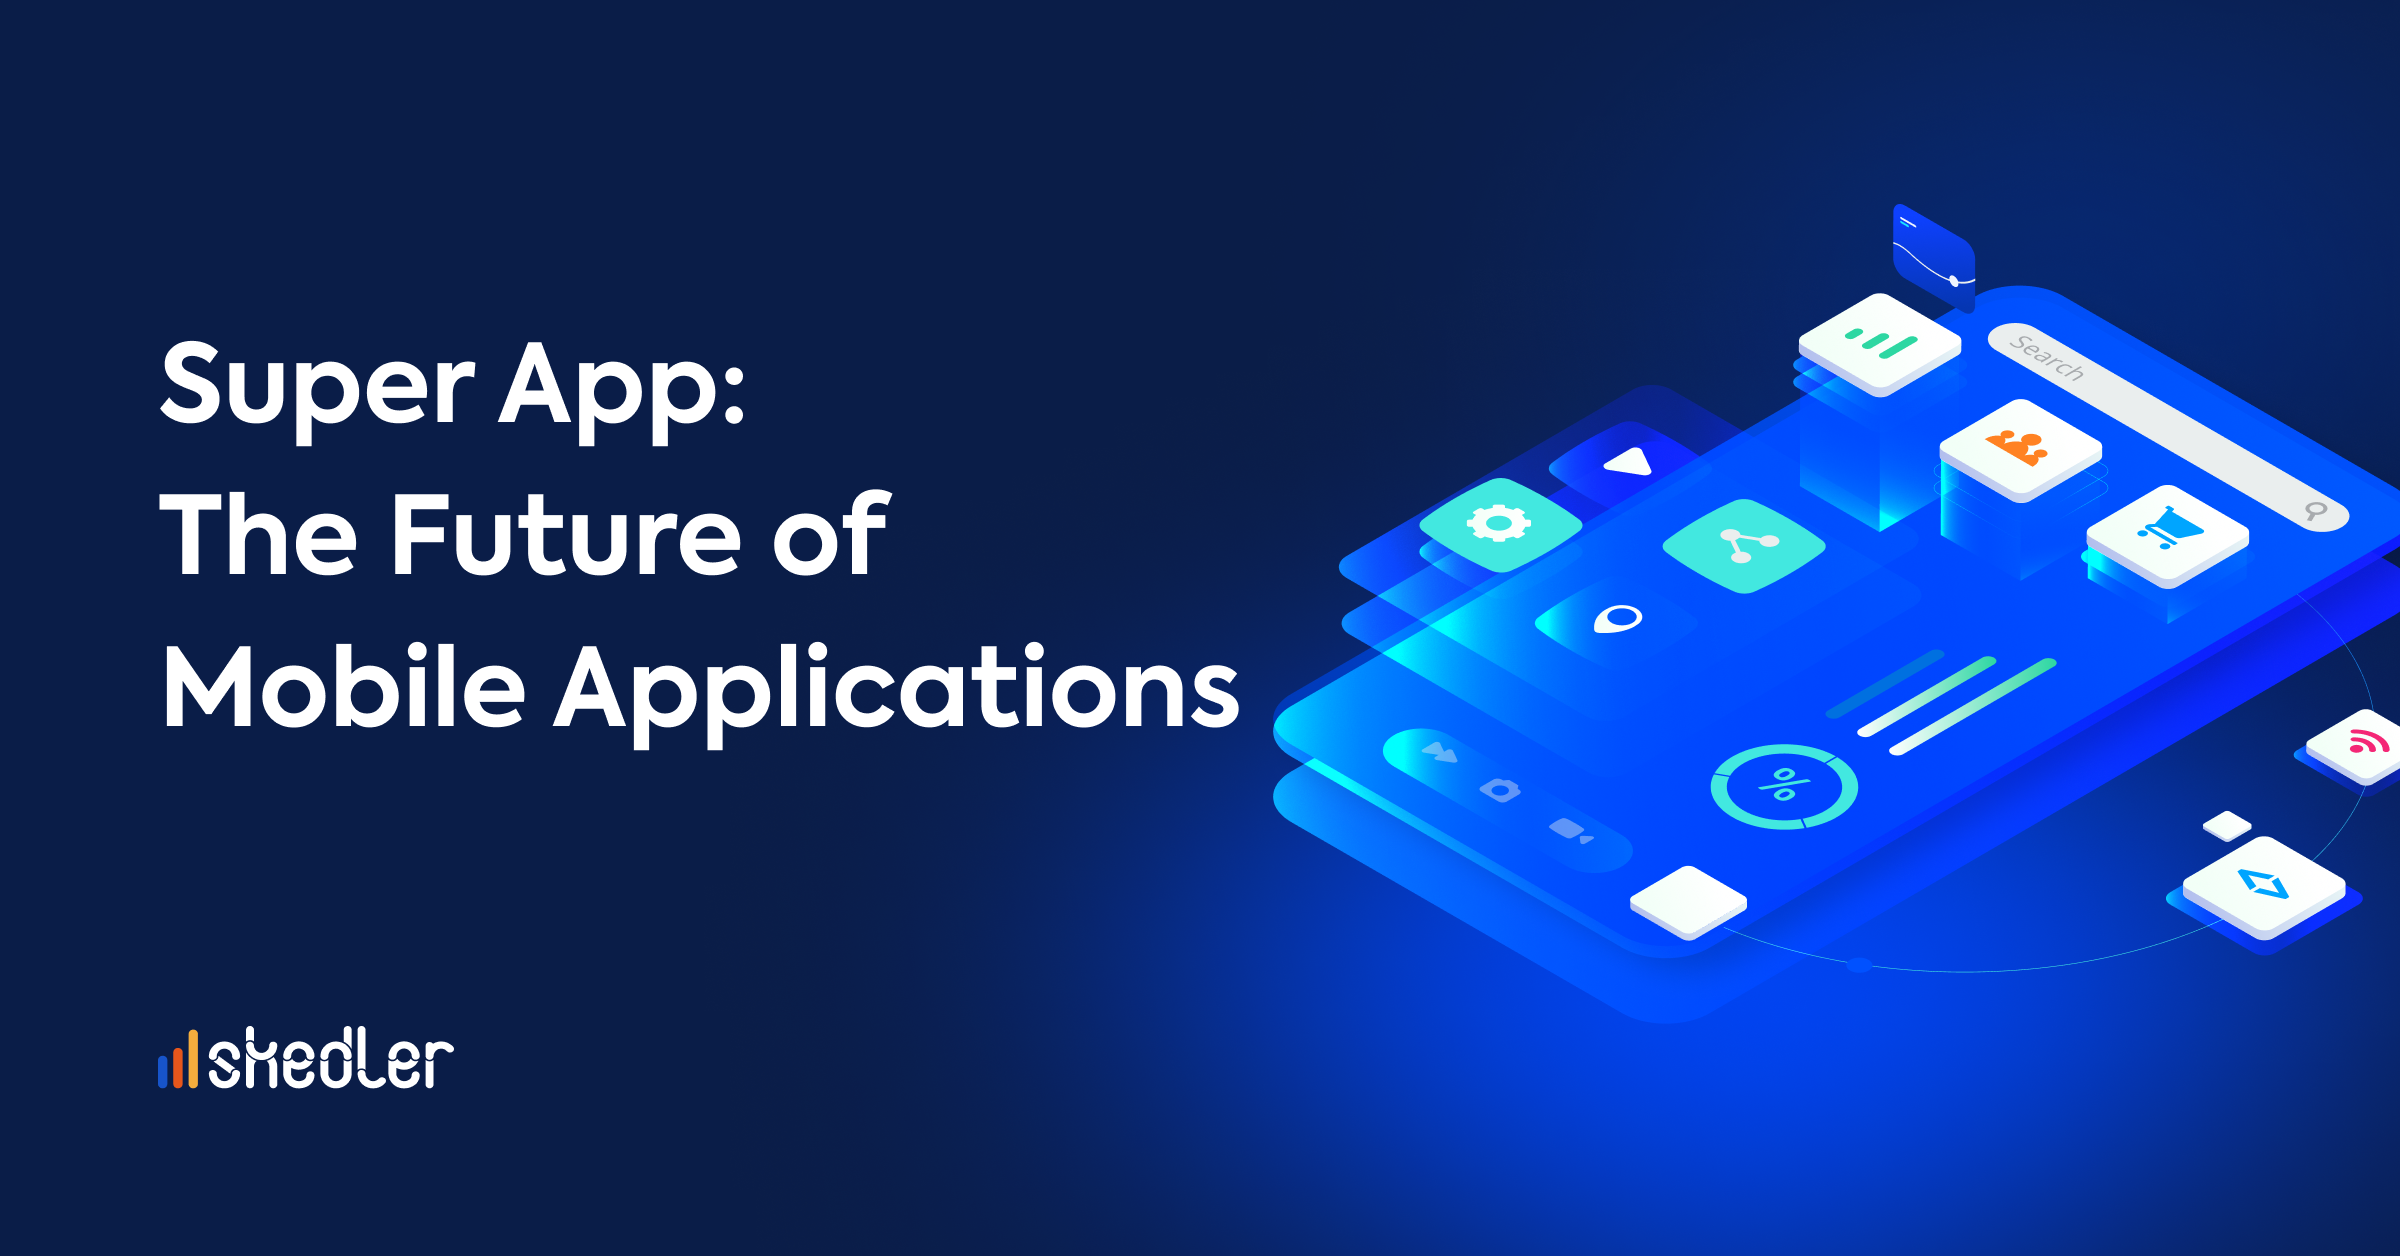 Supper Apps: what are supper apps - the future of mobile applications